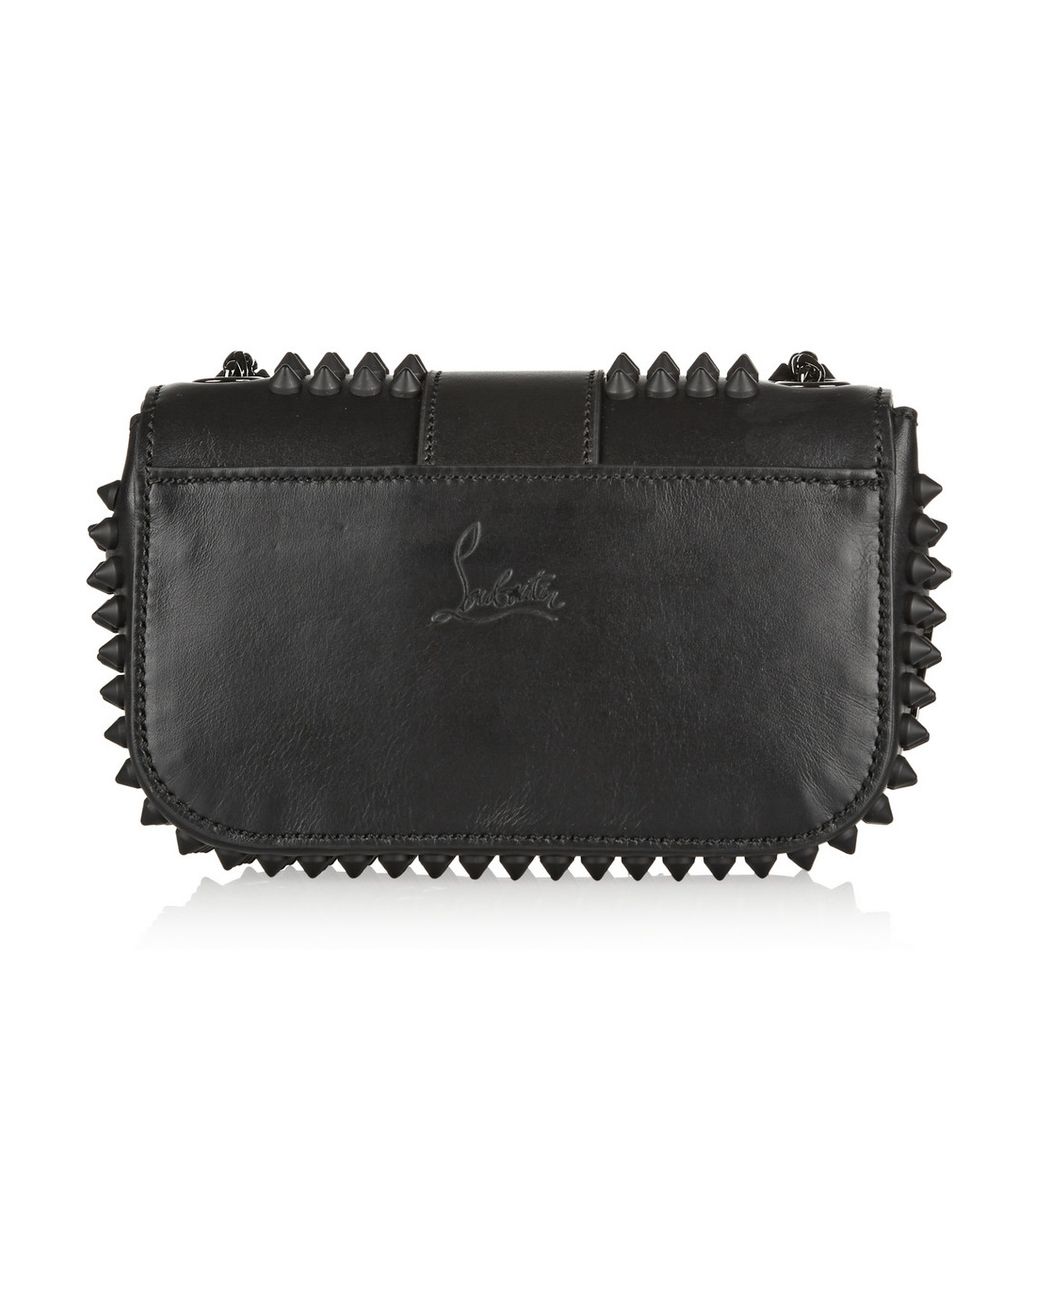 Christian Louboutin Sweety Charity Mini Spiked Leather Shoulder Bag in  Black | Lyst